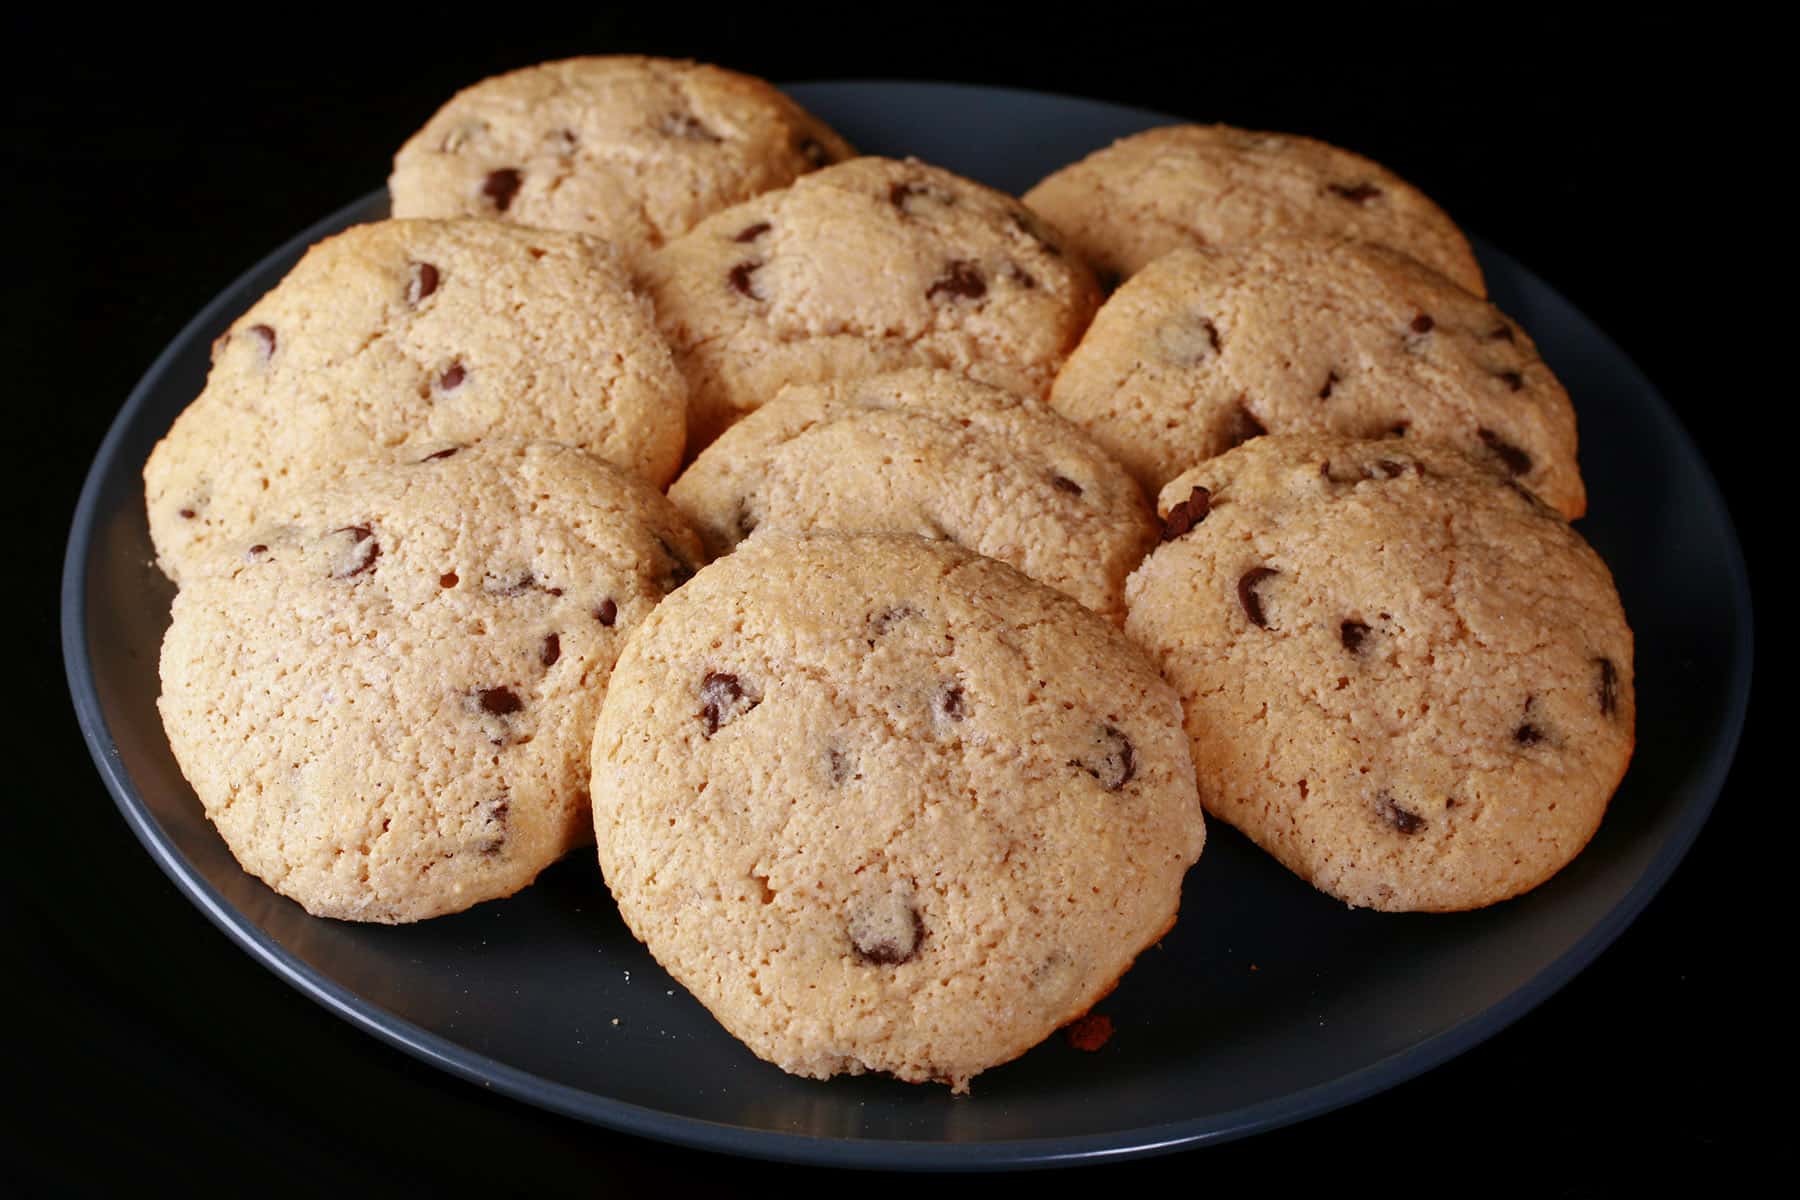 A plate of low carb chocolate chip cookies.